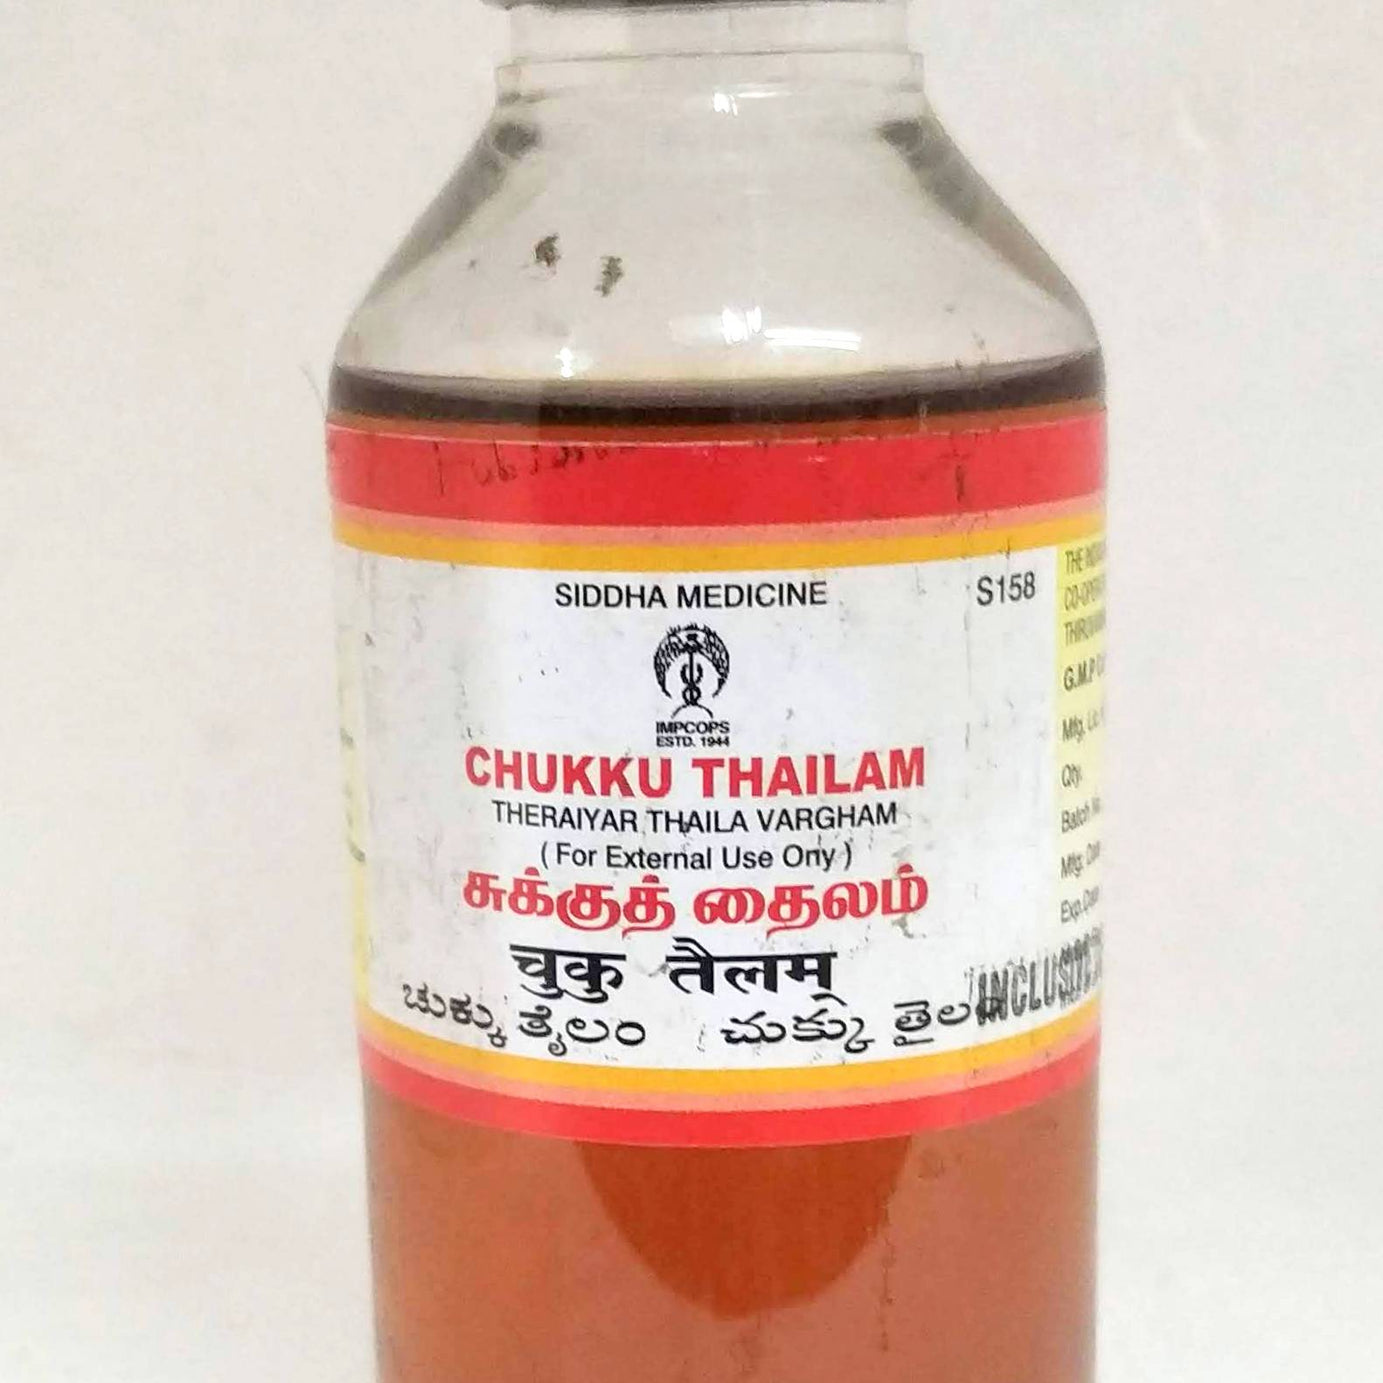 Shop Impcops Chukku Thailam 100ml at price 146.00 from Impcops Online - Ayush Care